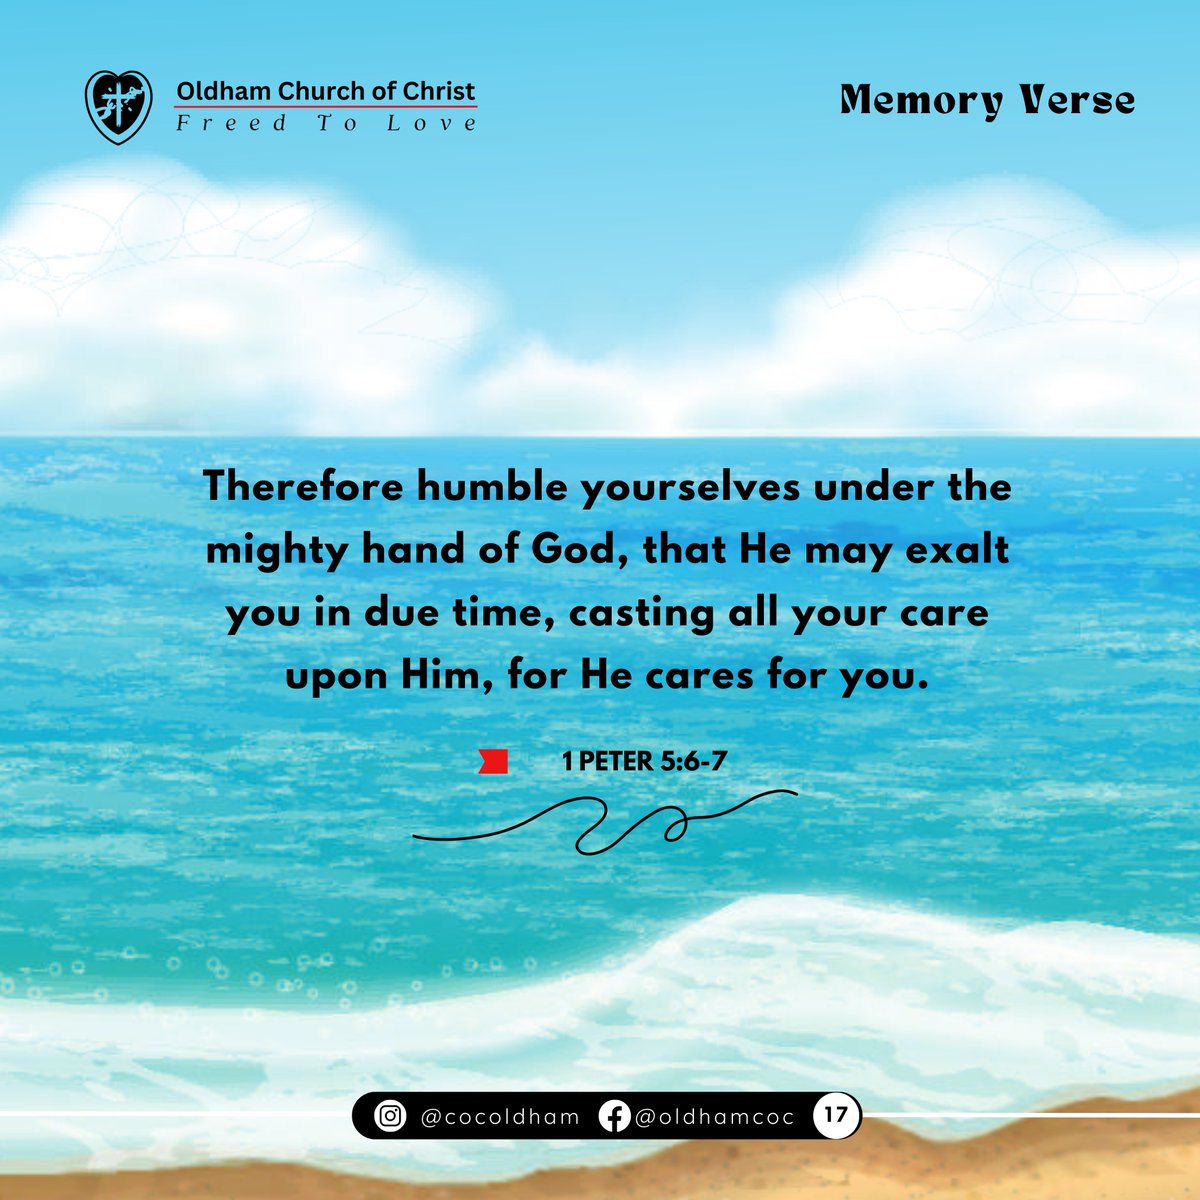 The Memory Verse Challenge Continues! Week 17 - 1 Peter 5:6-7 urges us to humble ourselves, therefore, under God’s mighty hand, that he may lift us up in due time. Cast all your anxiety on him because he cares for us.